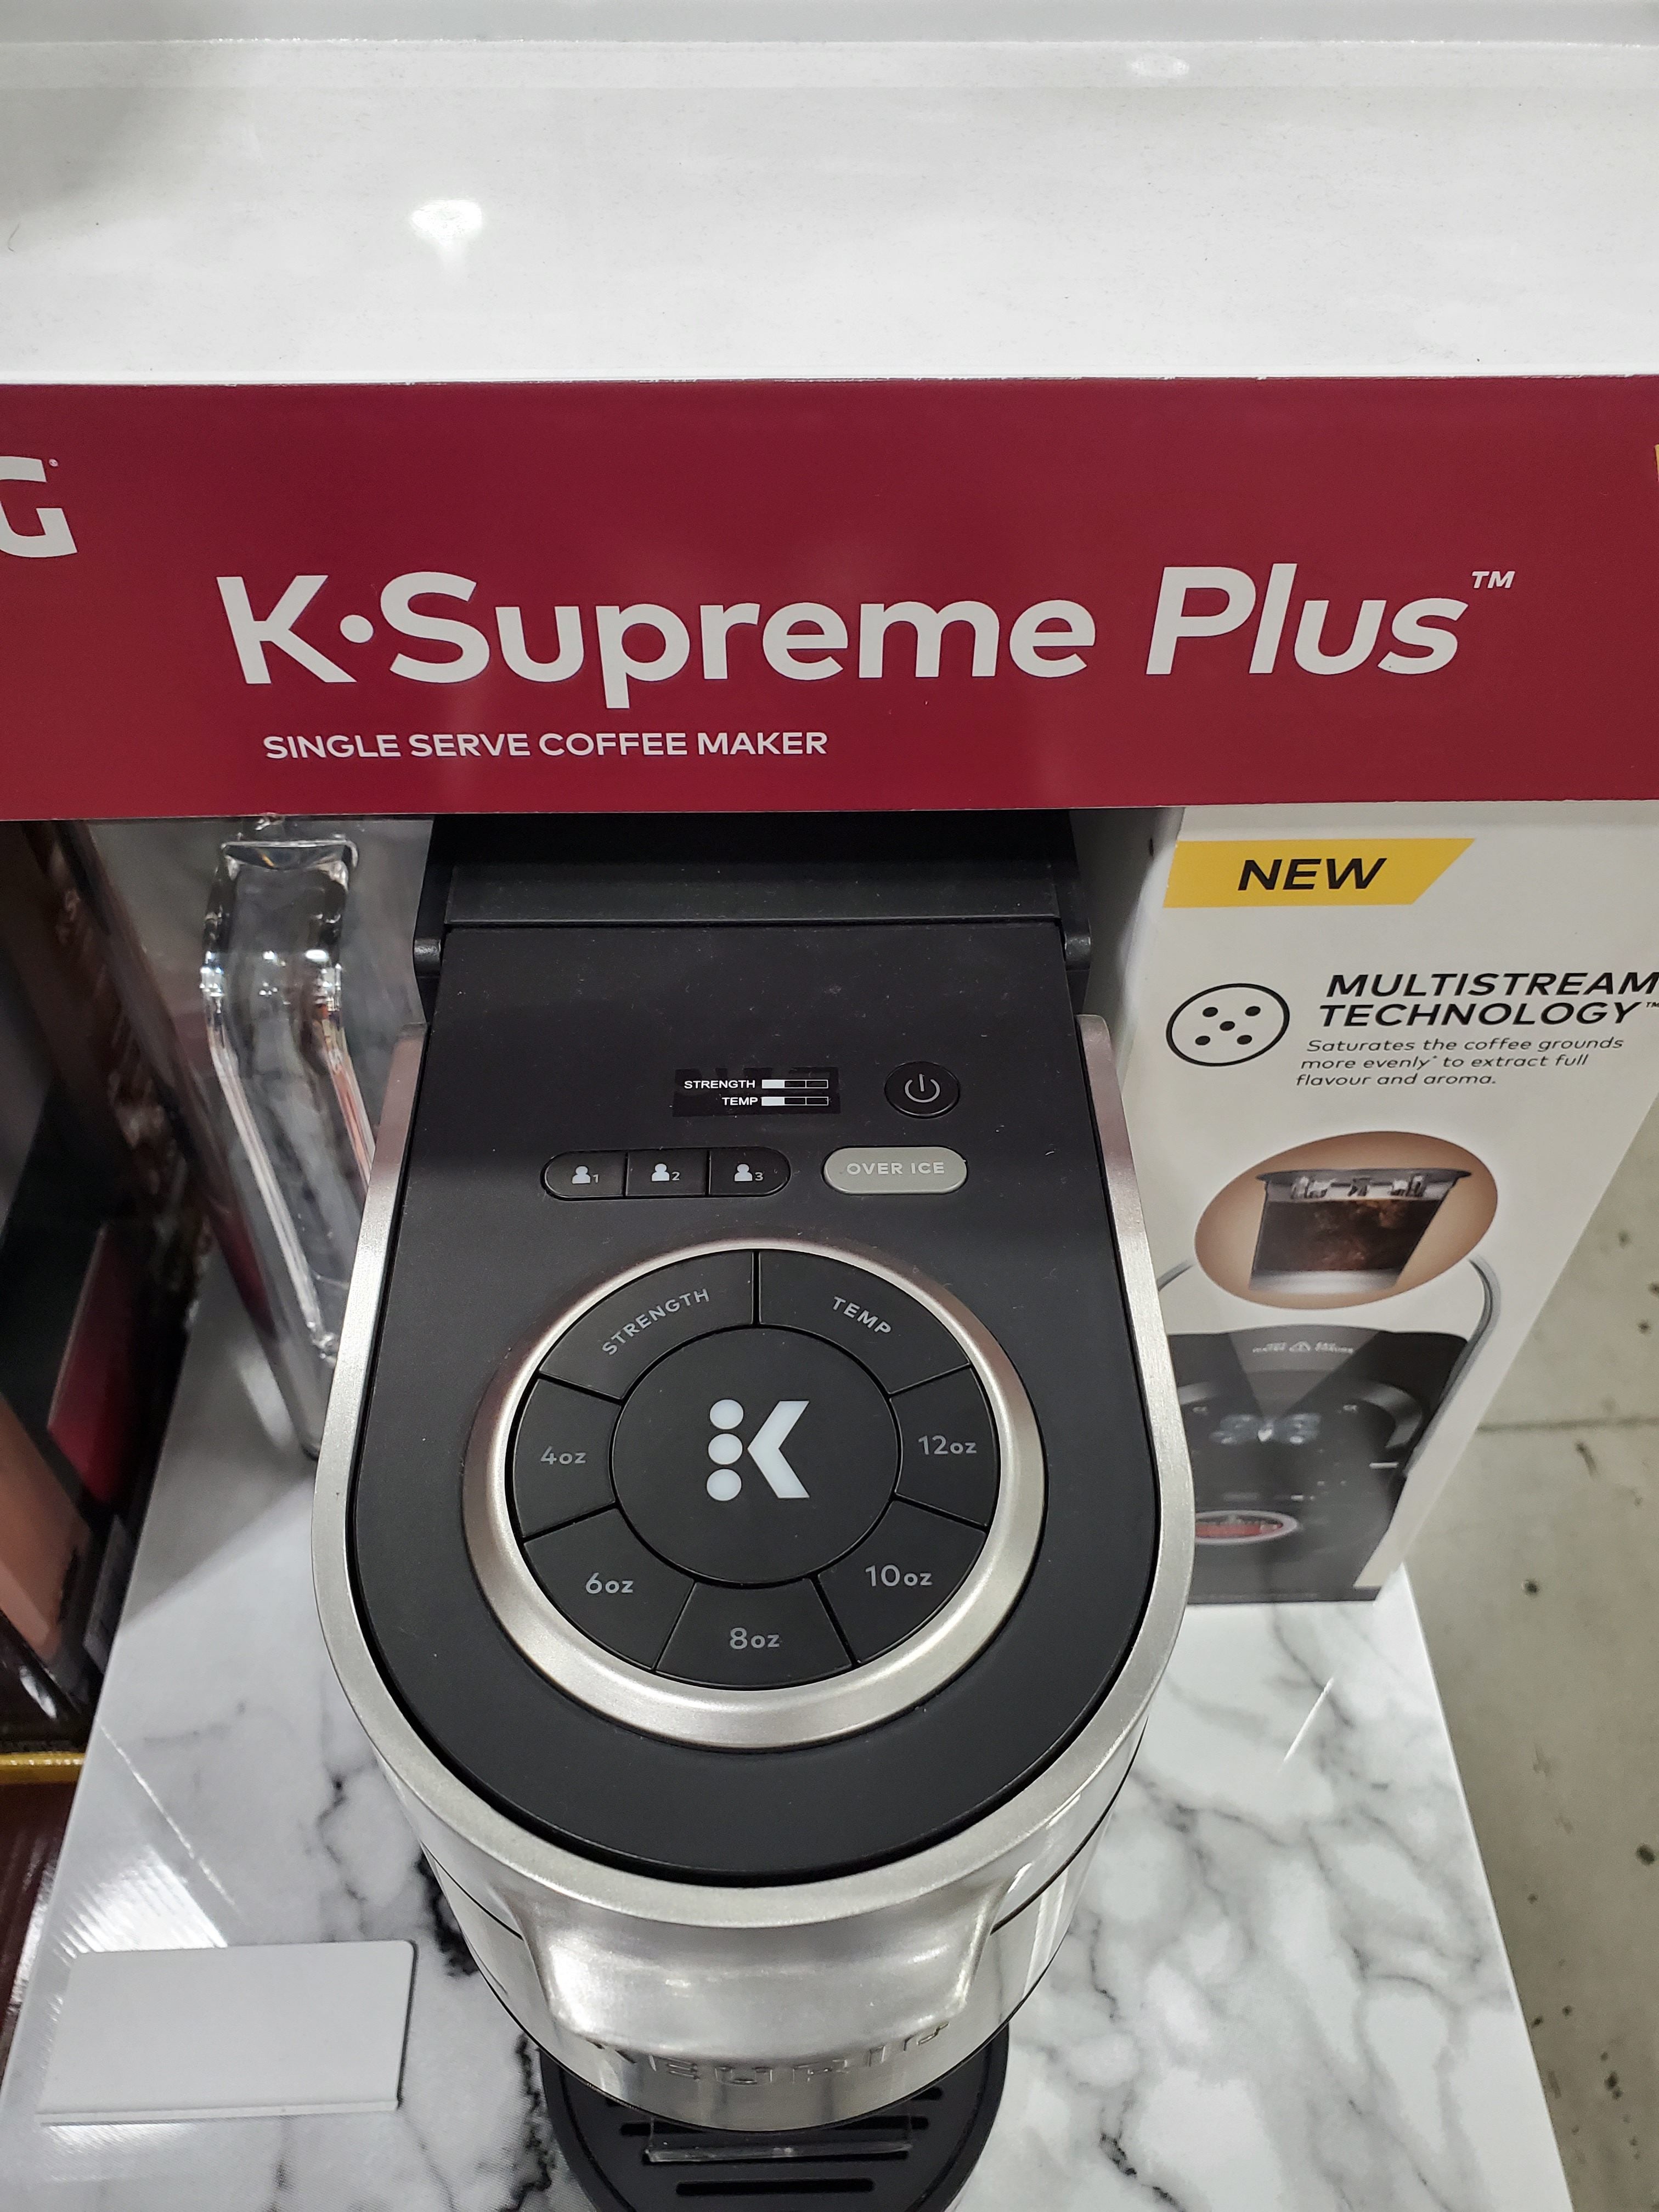 Costco Deals - ☕️ @keurig K Duo Plus Coffee Maker on sale $40 off now only  $159.99! If you need an upgrade this thing is legit! #costcodeals #costco # keurig #kcups #coffee available